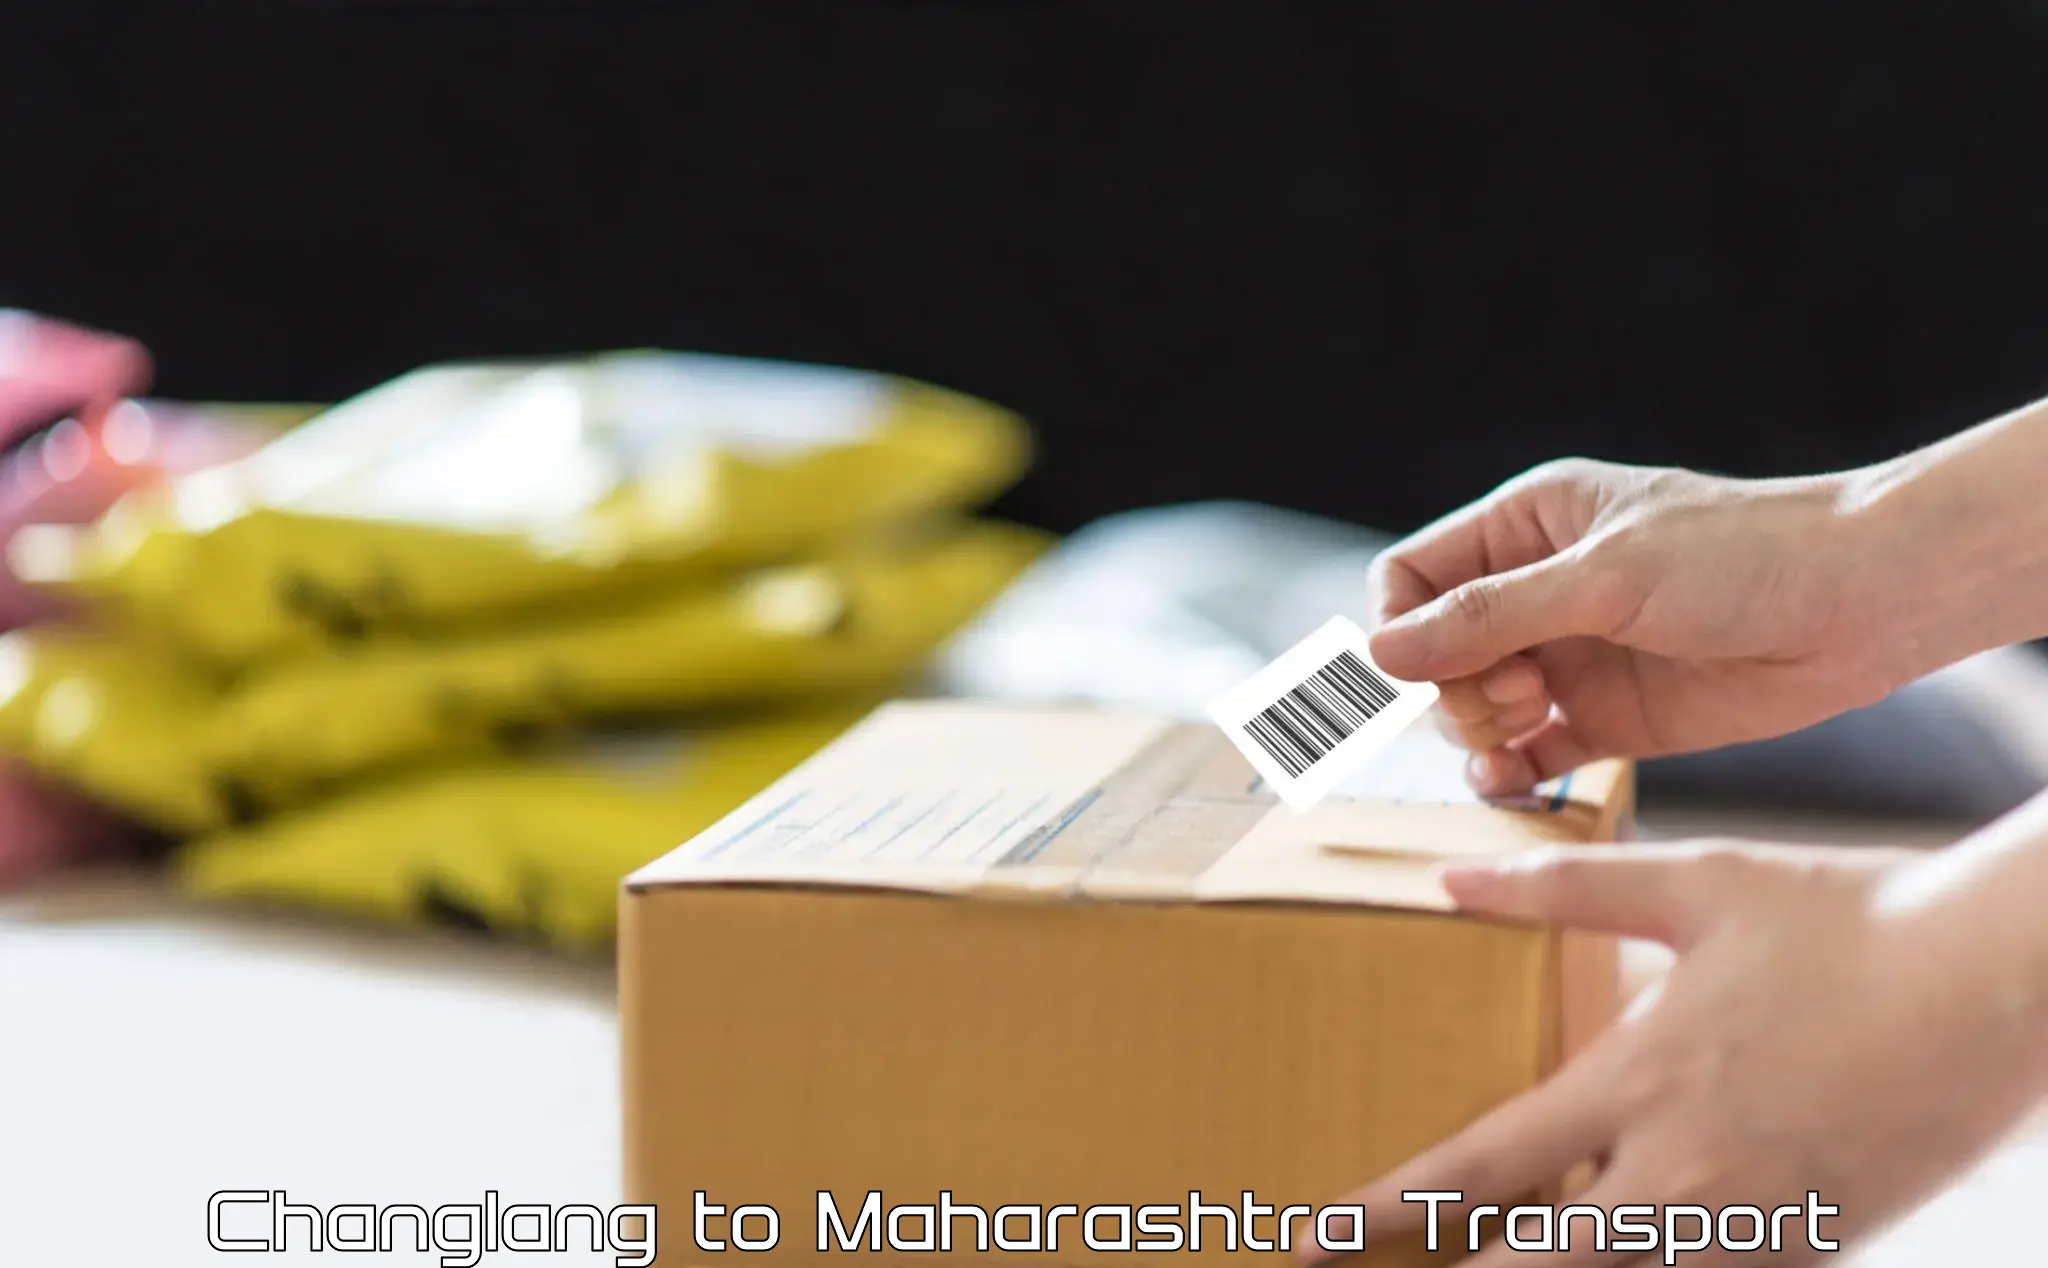 Air freight transport services Changlang to Nagpur